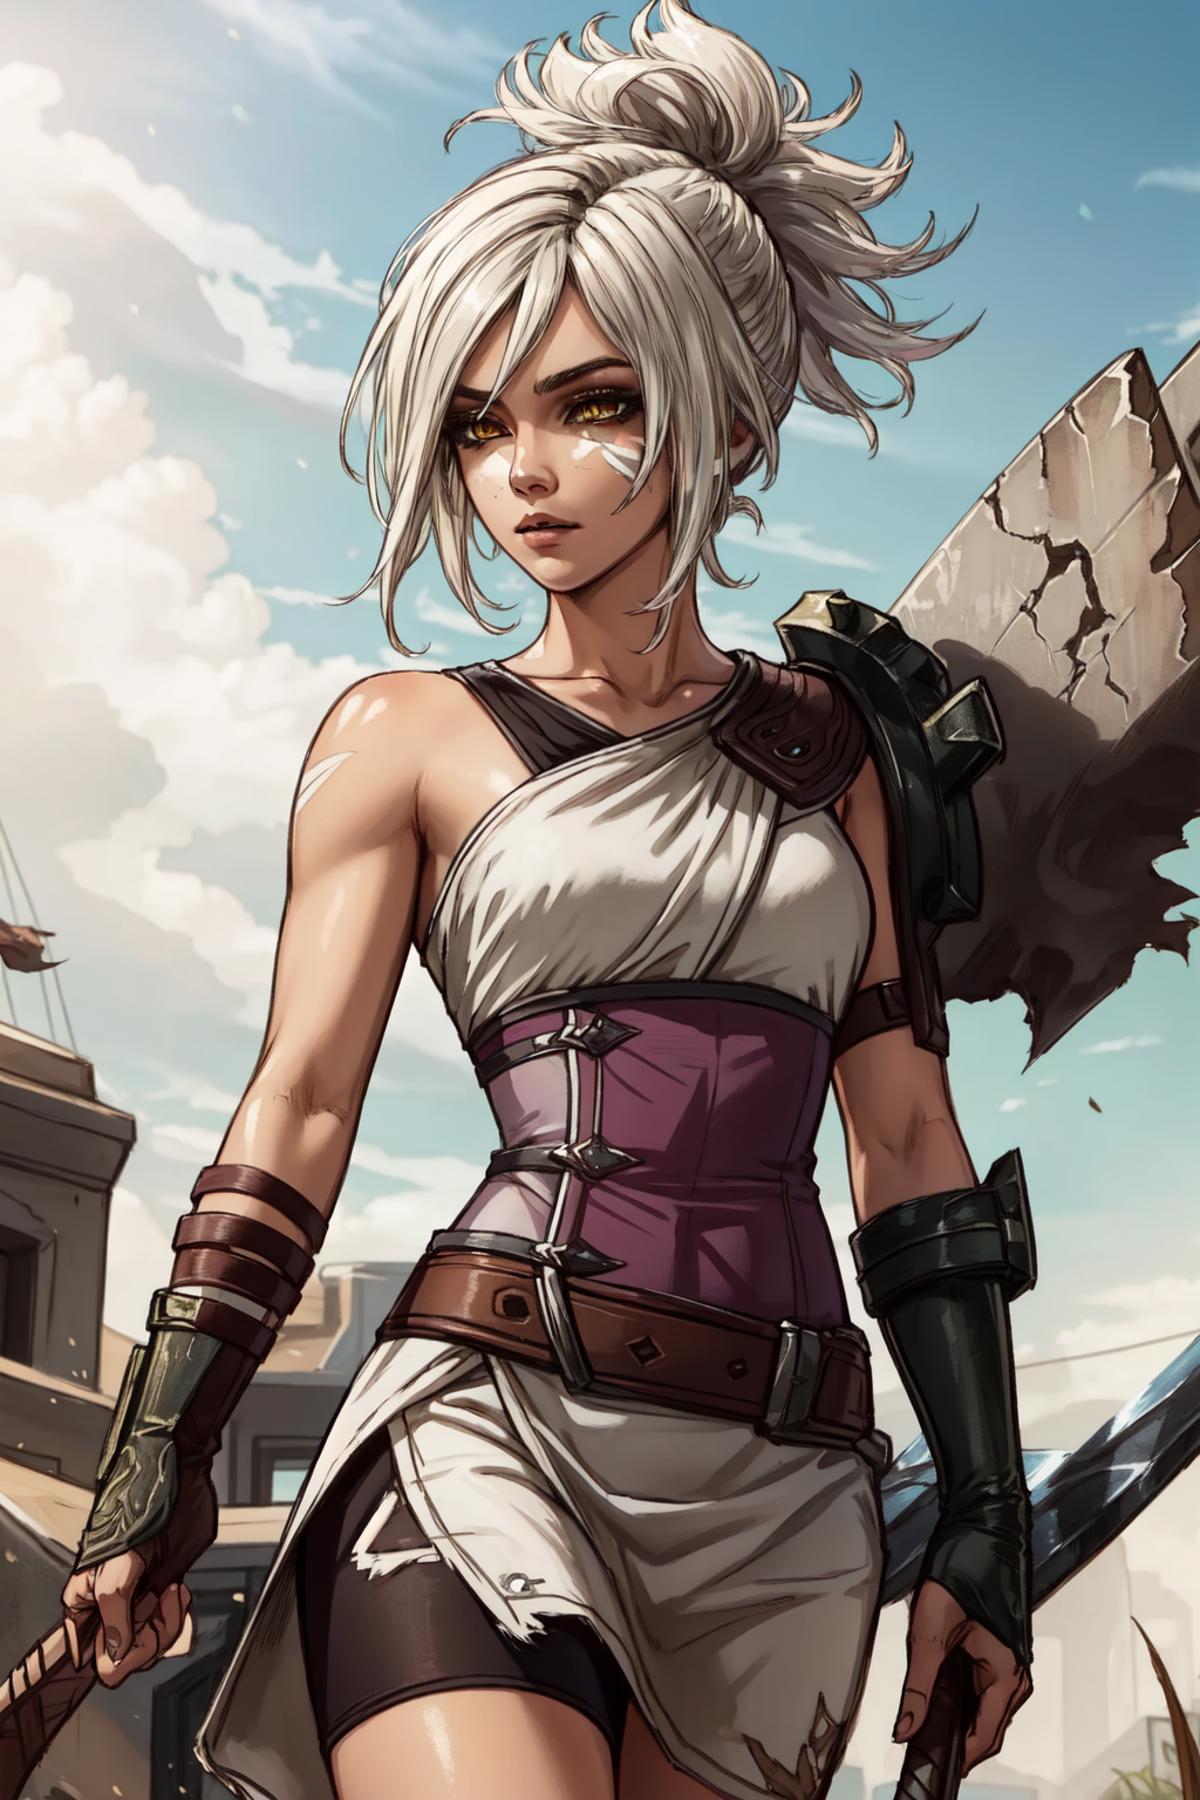 Riven | League of Legends image by Sedikit